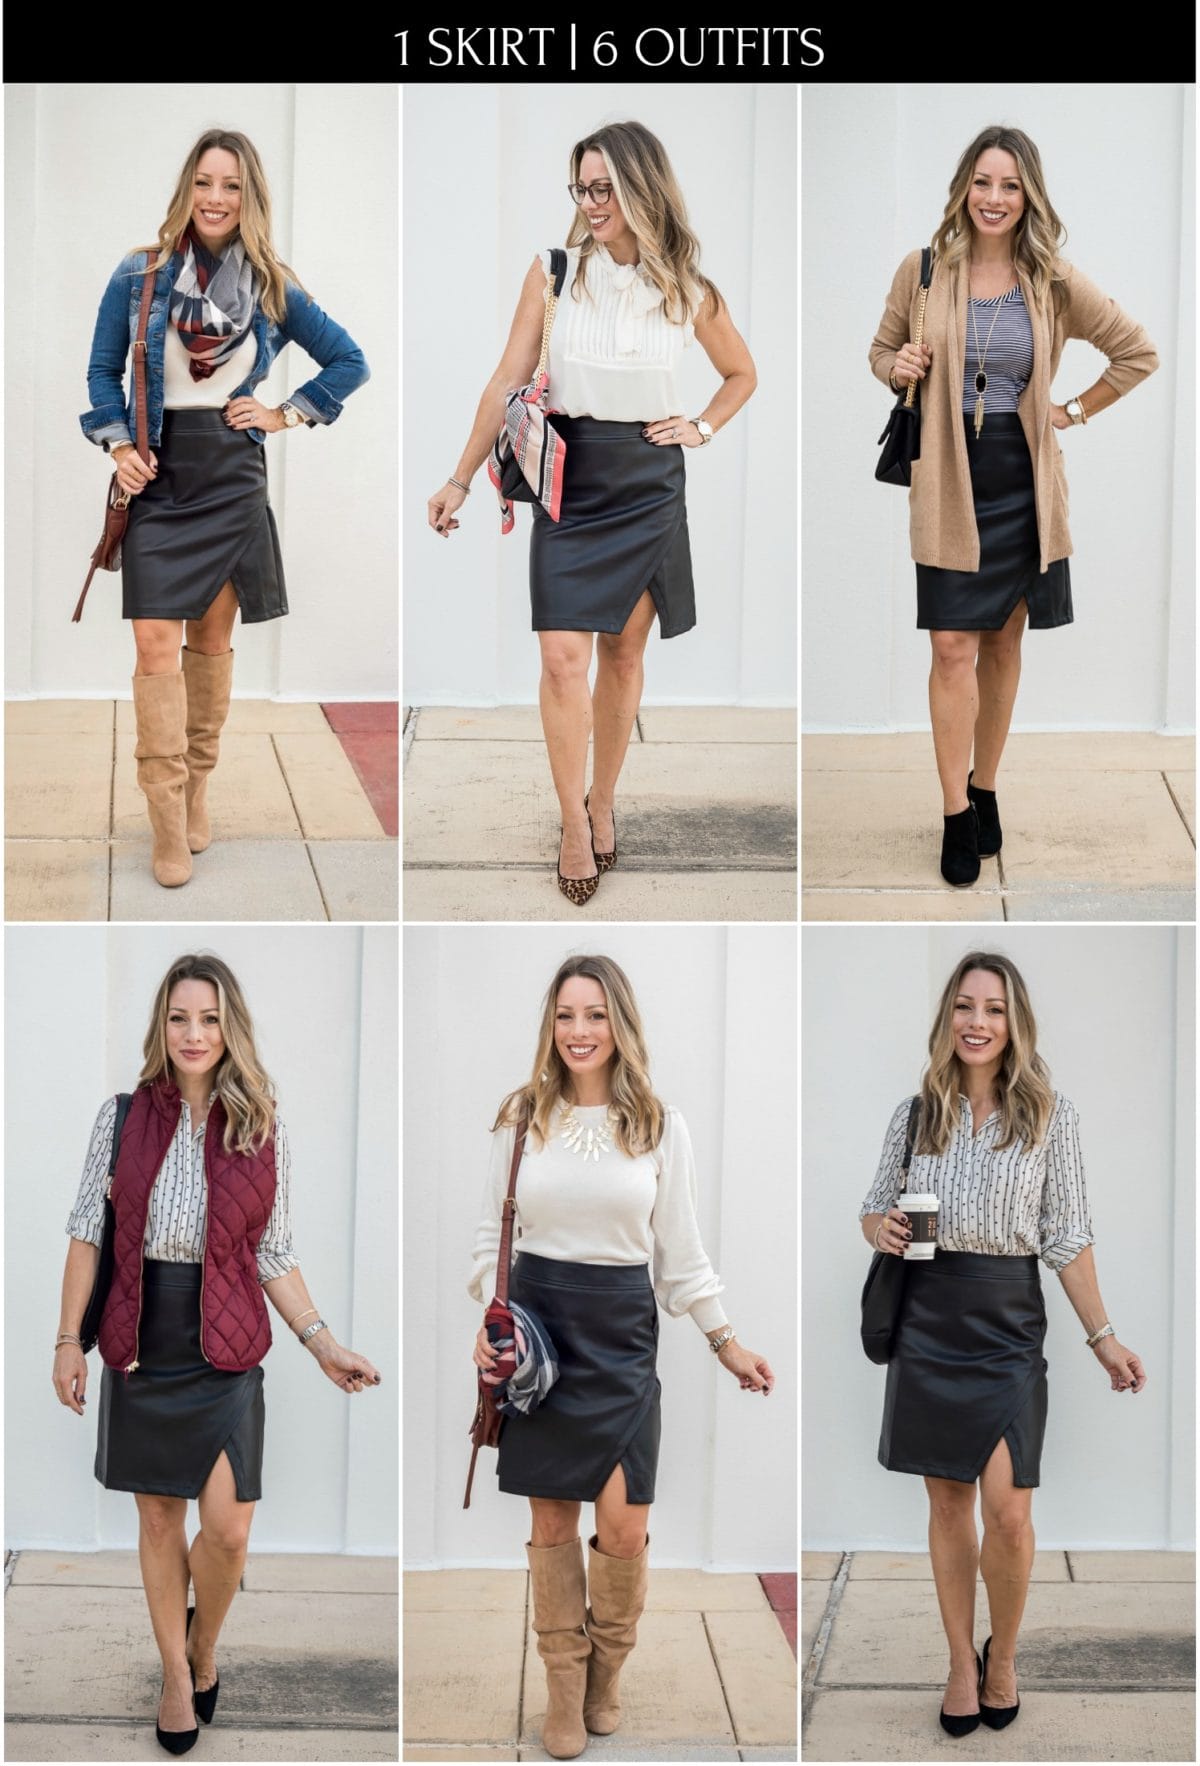 1 Skirt & 6 Outfits